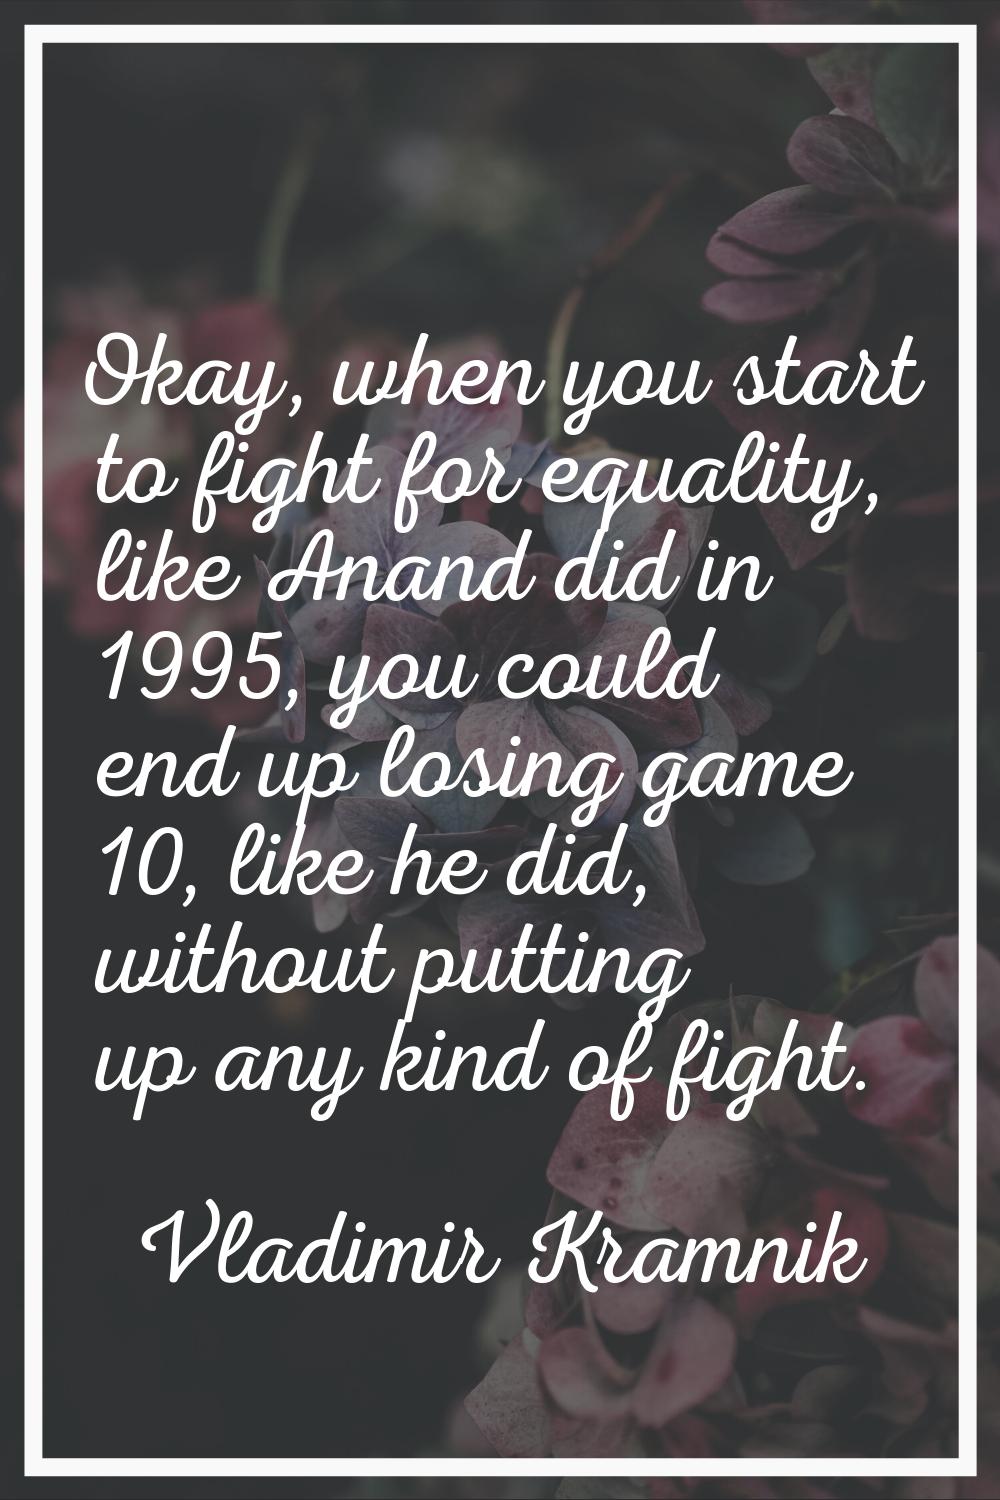 Okay, when you start to fight for equality, like Anand did in 1995, you could end up losing game 10